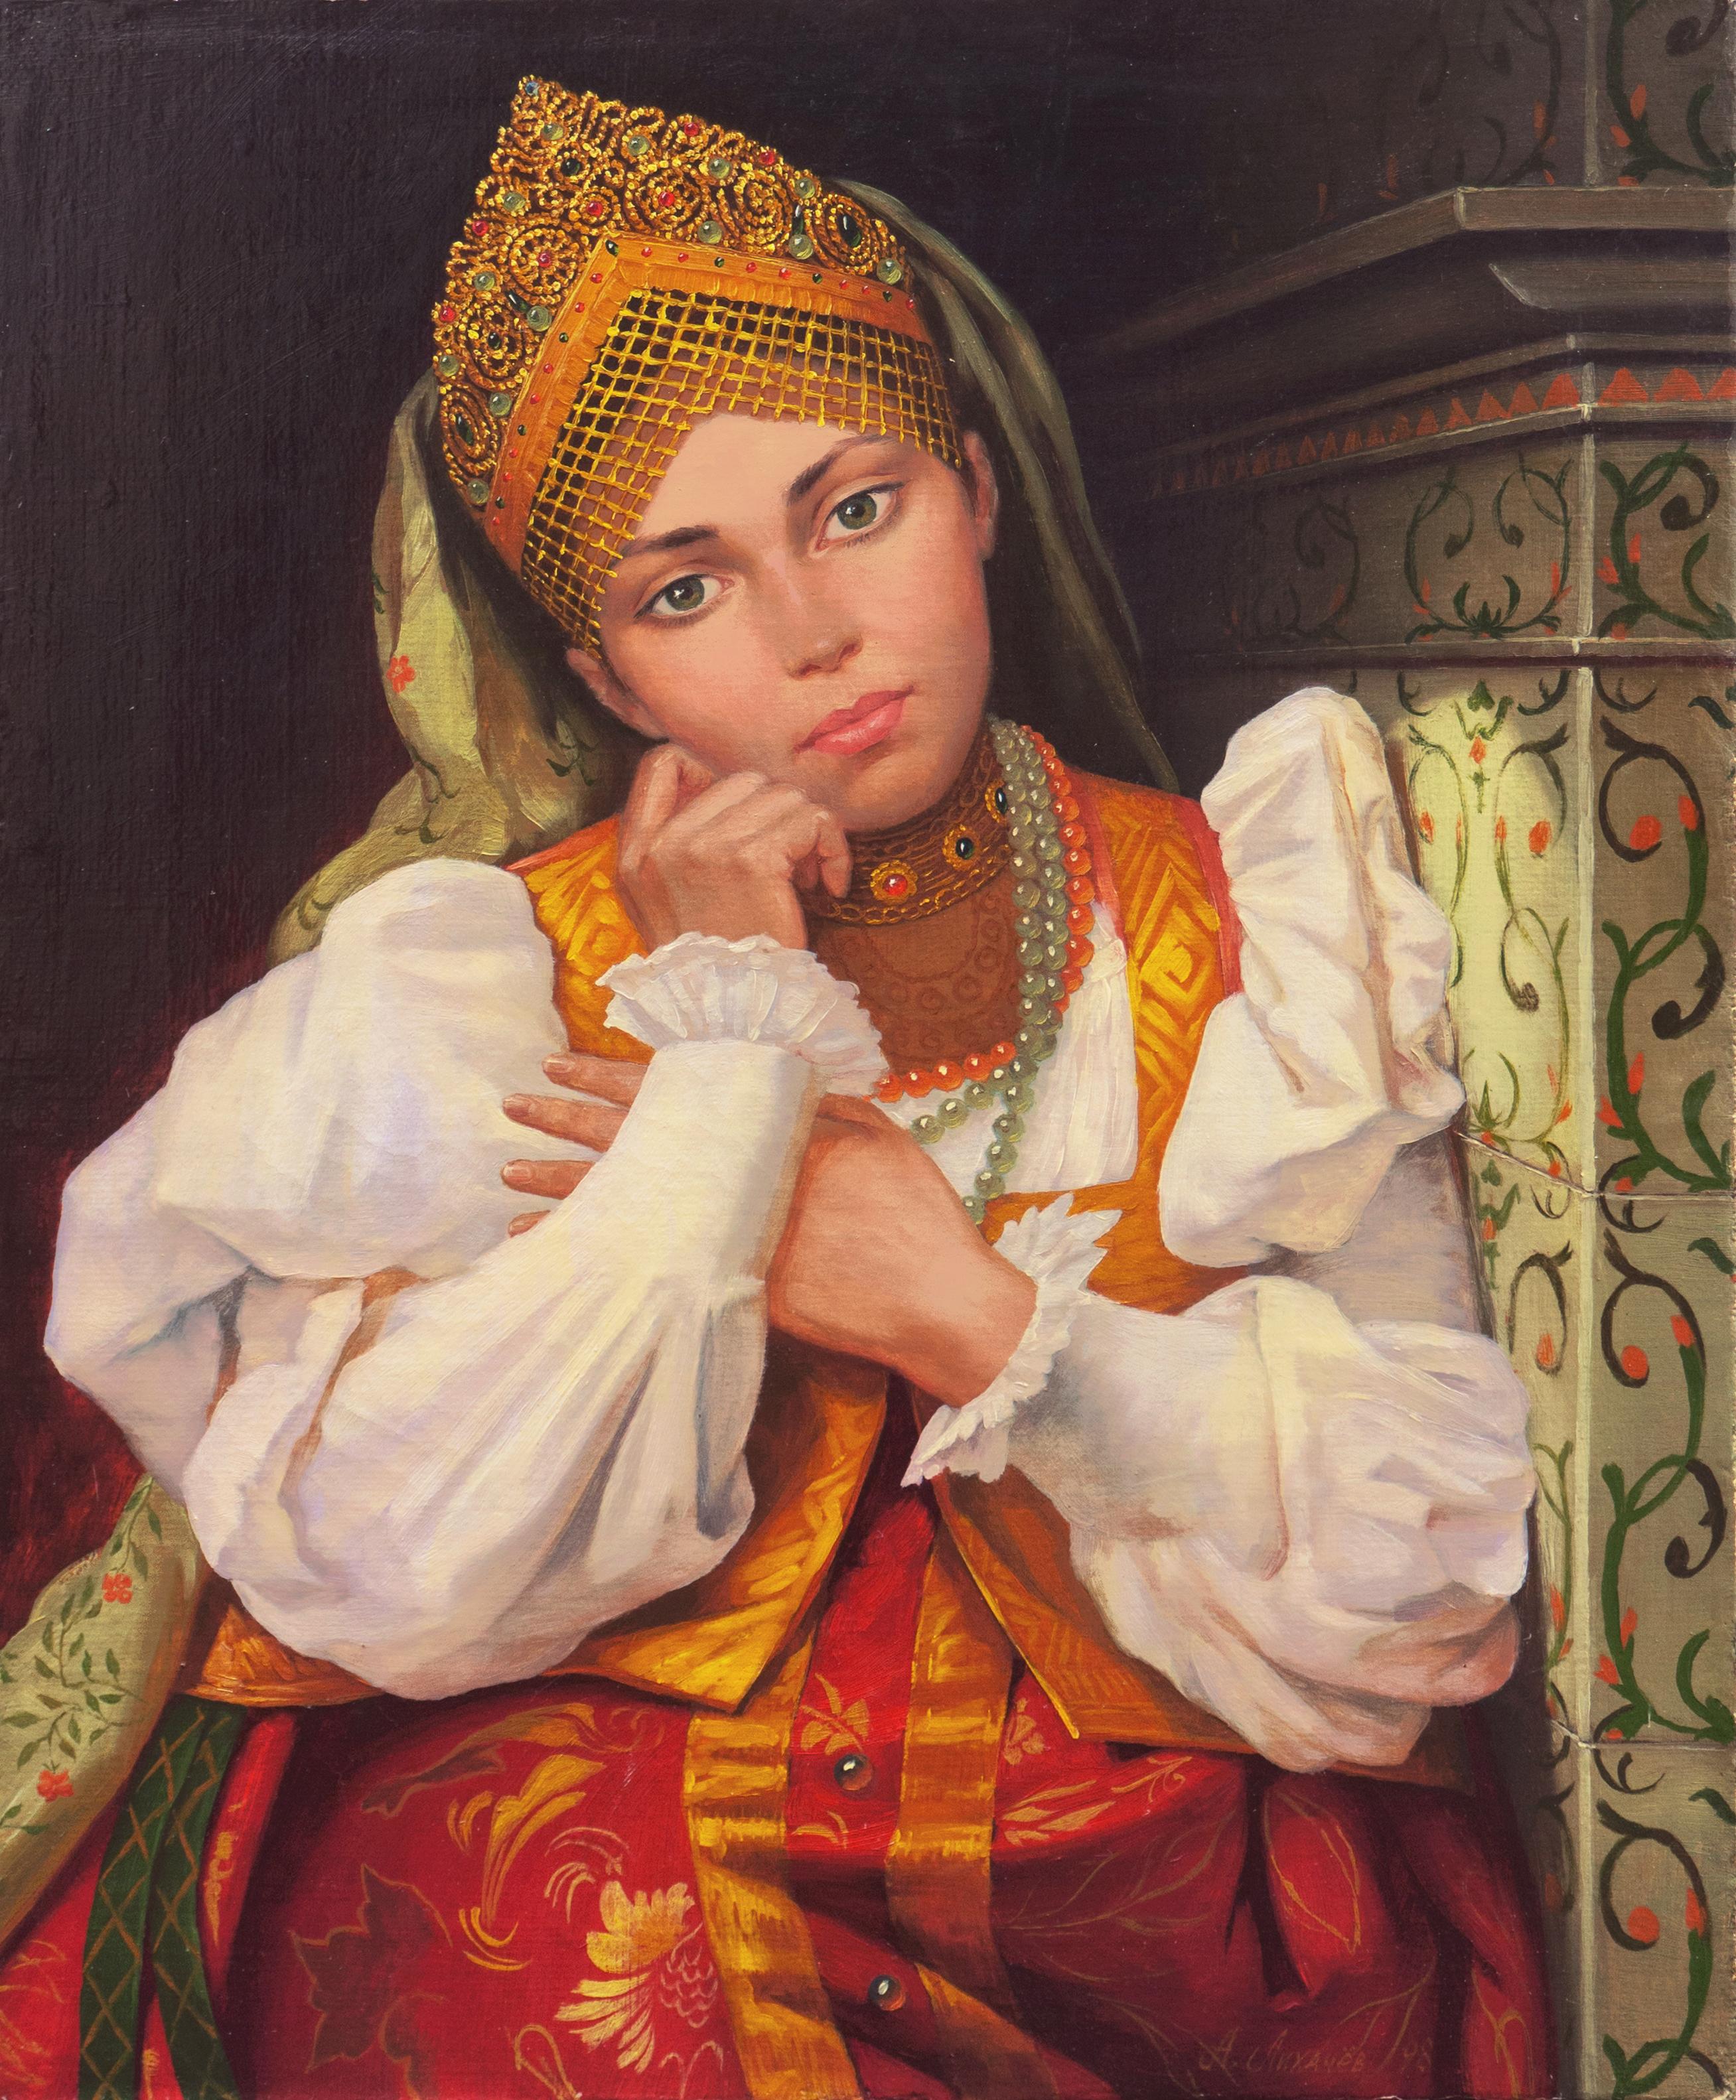 A. Lihachev Figurative Painting - 'Portrait of a Young Caucasian Woman', Traditional Folk Dress, Russian Orthodox